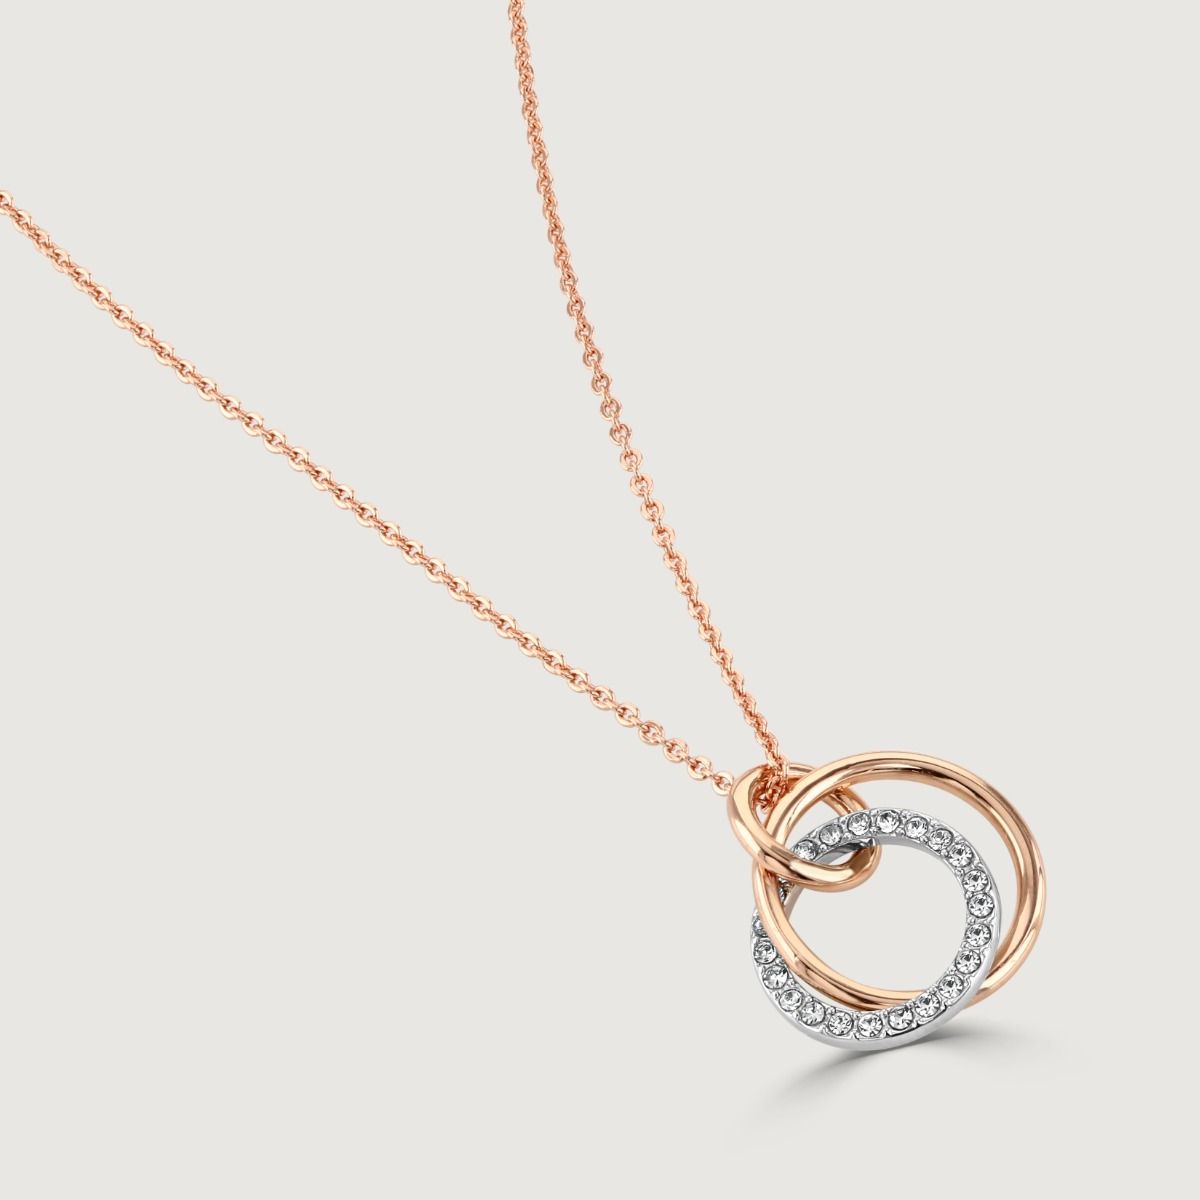 This crystal and polished two-tone pendant encapsulates sophistication with its classic design and modern twist. It effortlessly pairs together rhodium and rose gold hoops, which are finished off with crystals. 